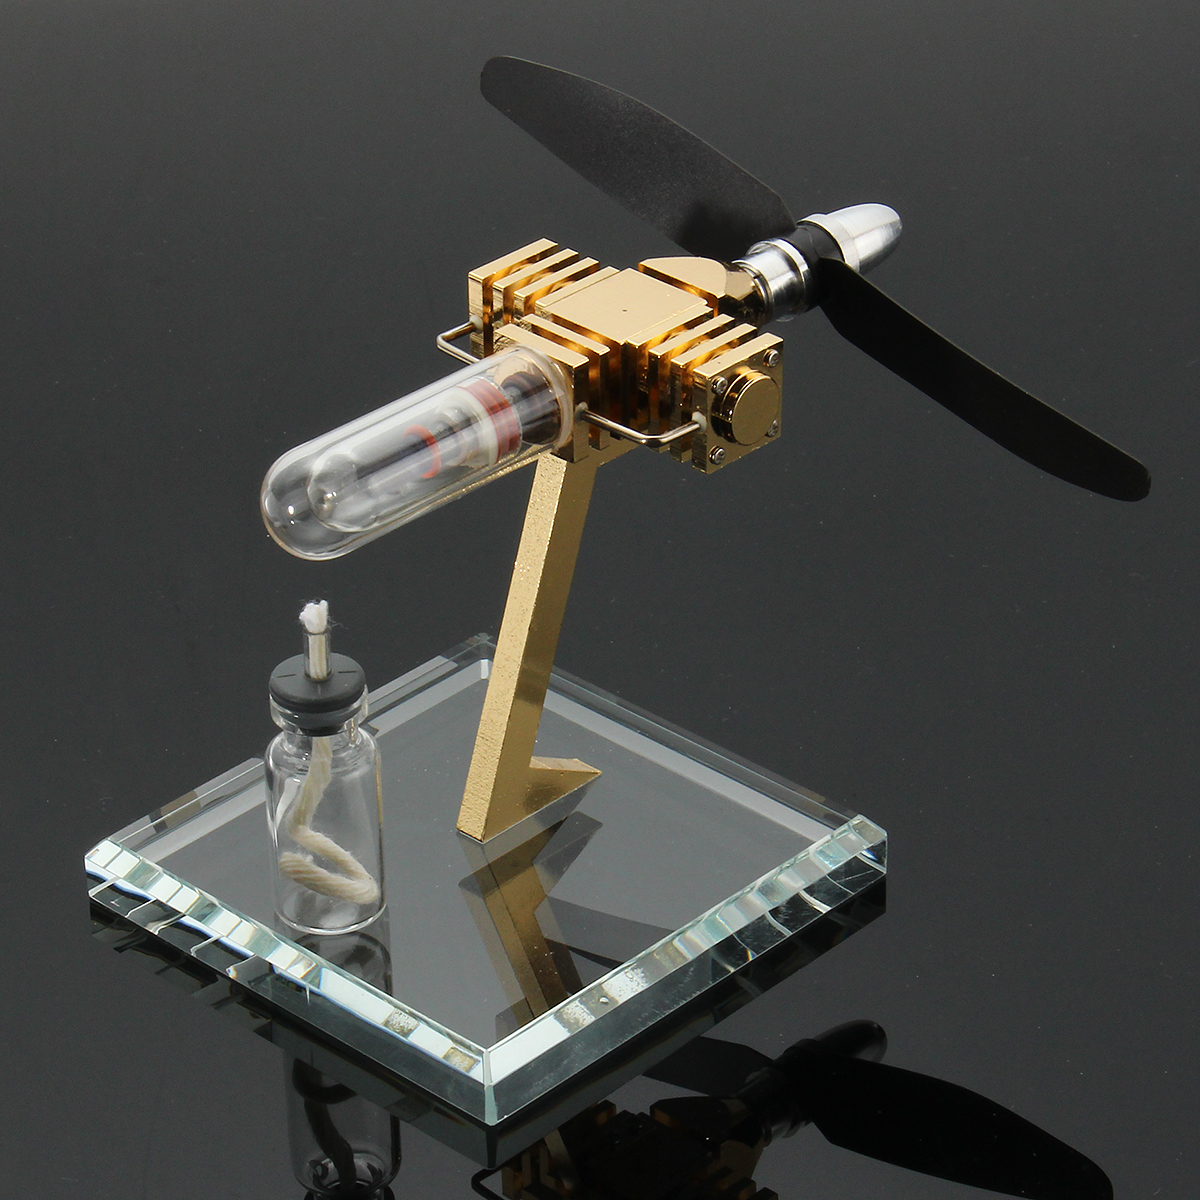 Aircraft-Hot-Air-Engine-Power-Generator-Engine-Innovative-Stirling-Engine-Science-Toys-New-Version-1099841